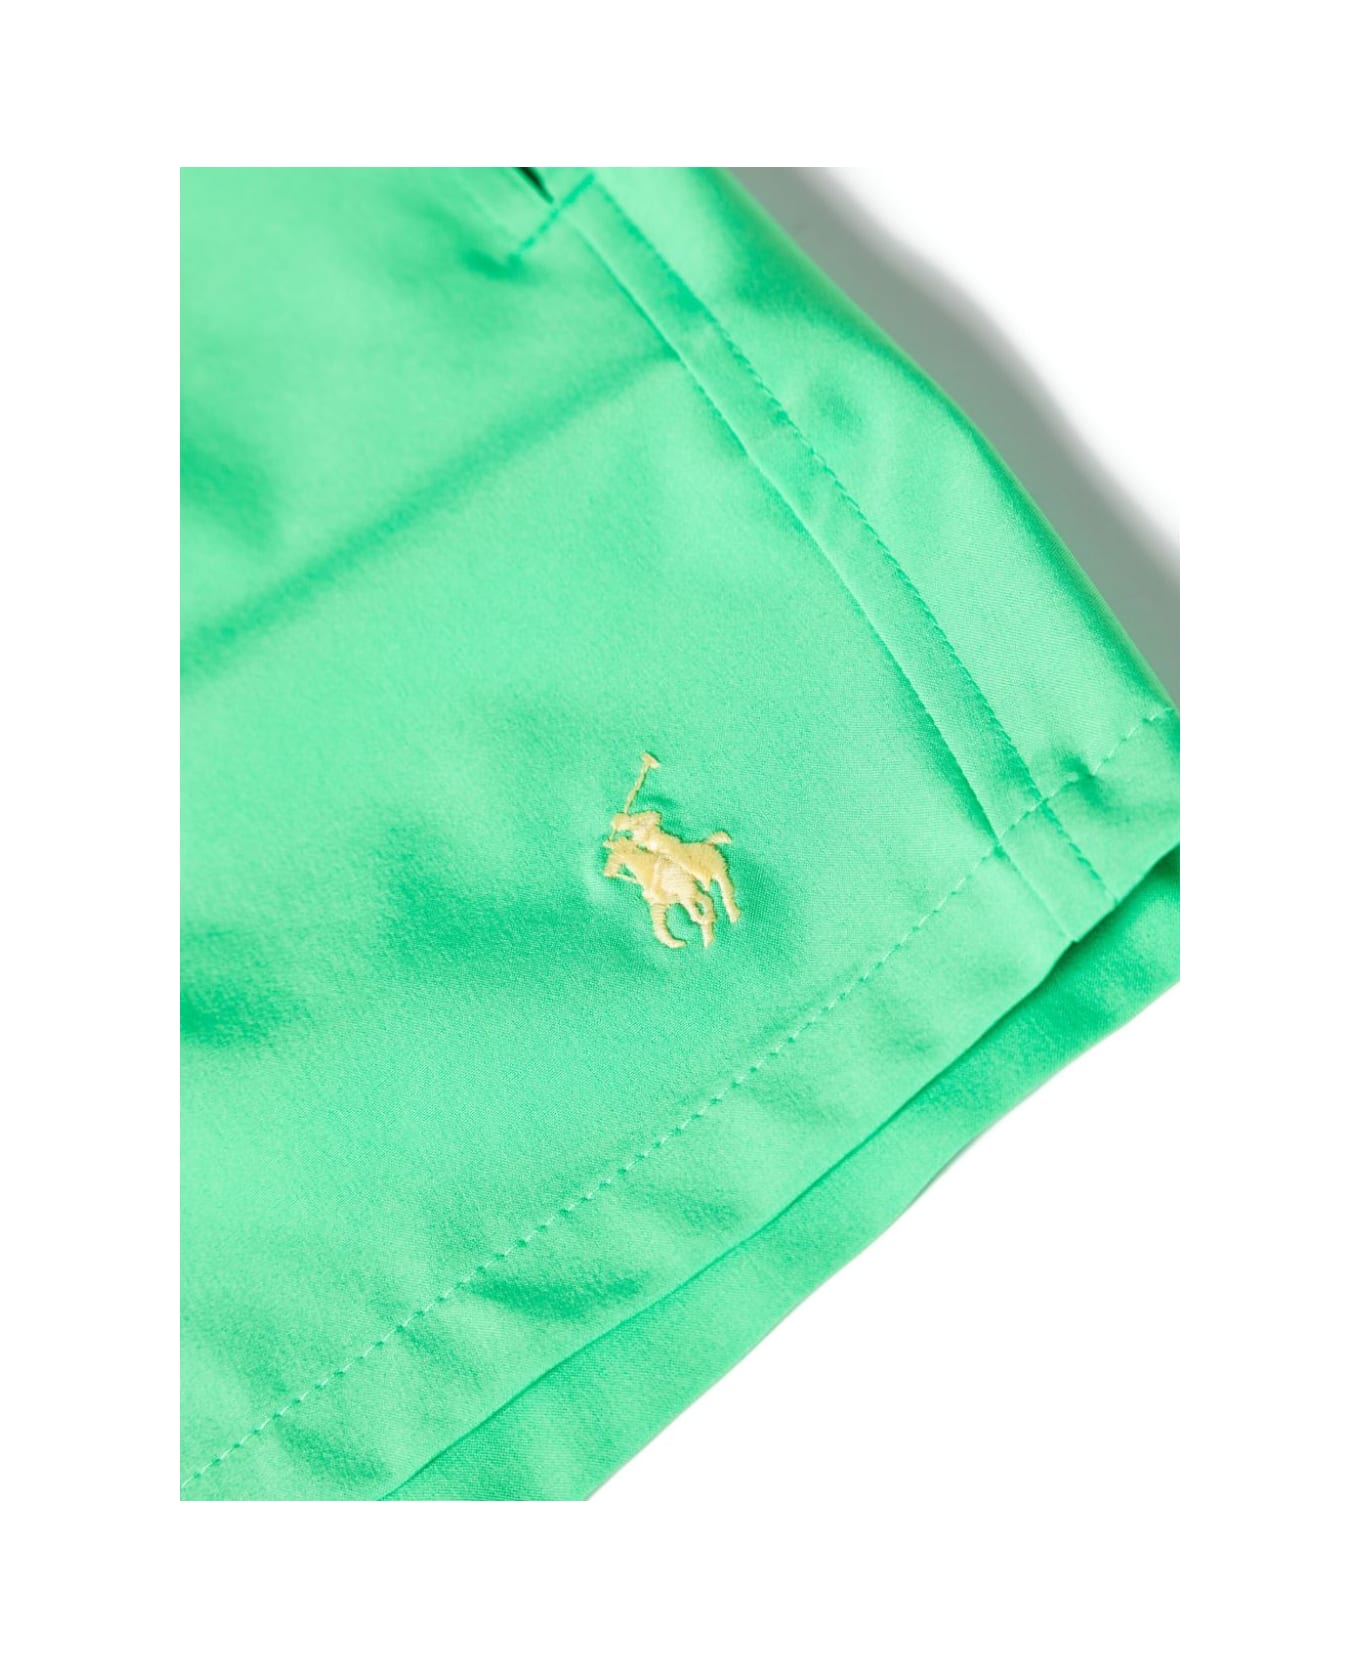 Ralph Lauren Green Swim Shorts With Embroidered Pony - Green